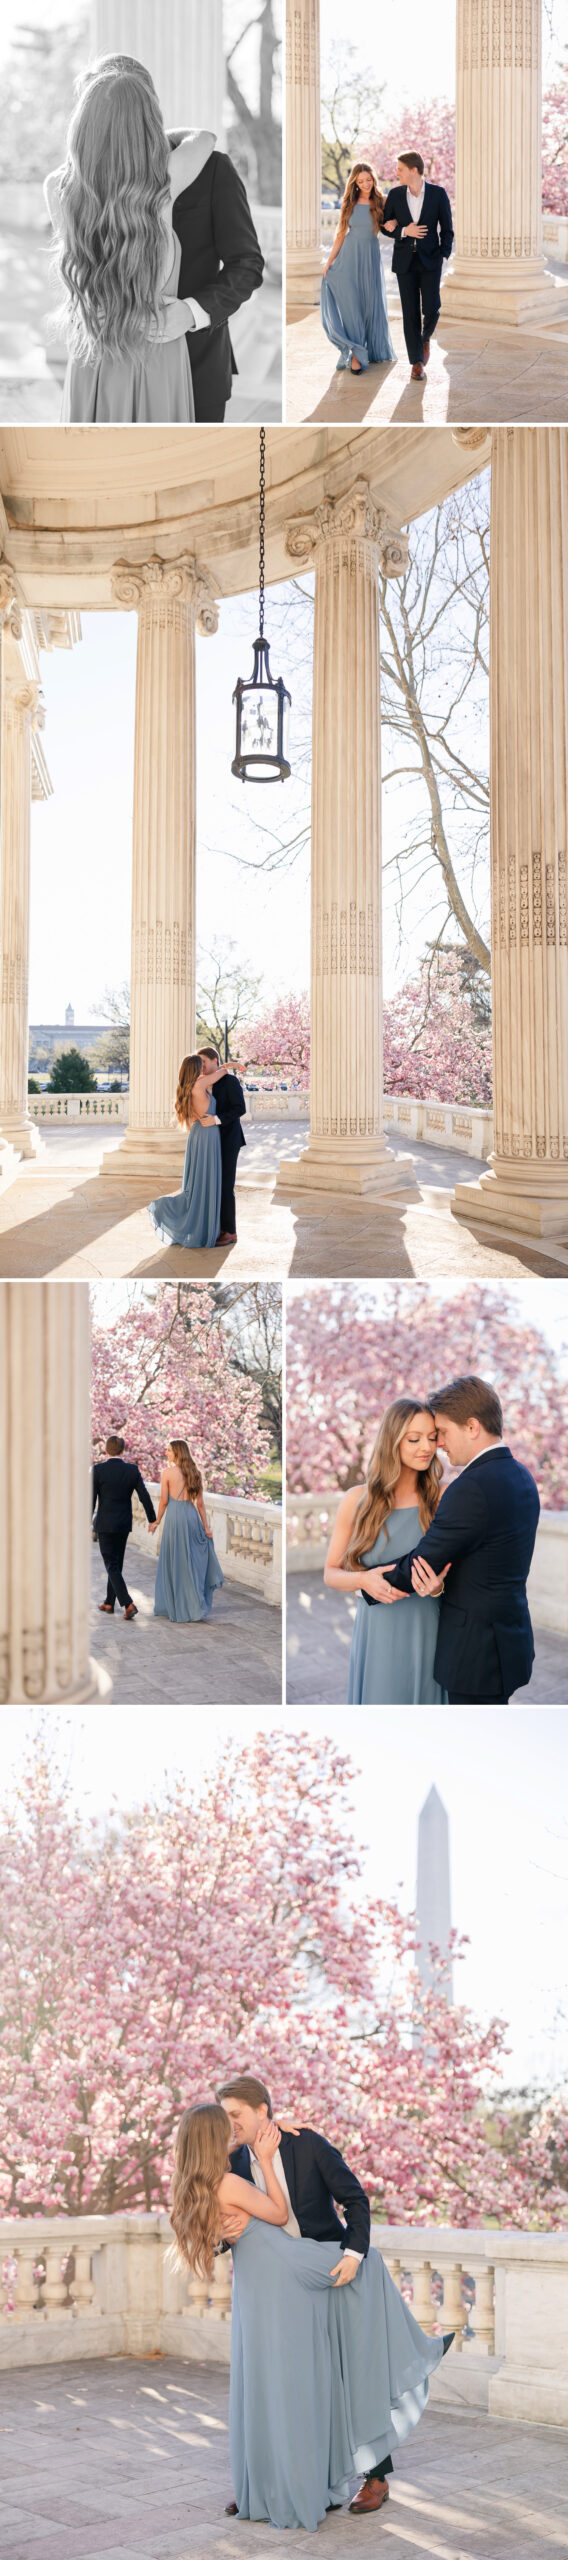 couple's portraits session at DAR constitution hall dc